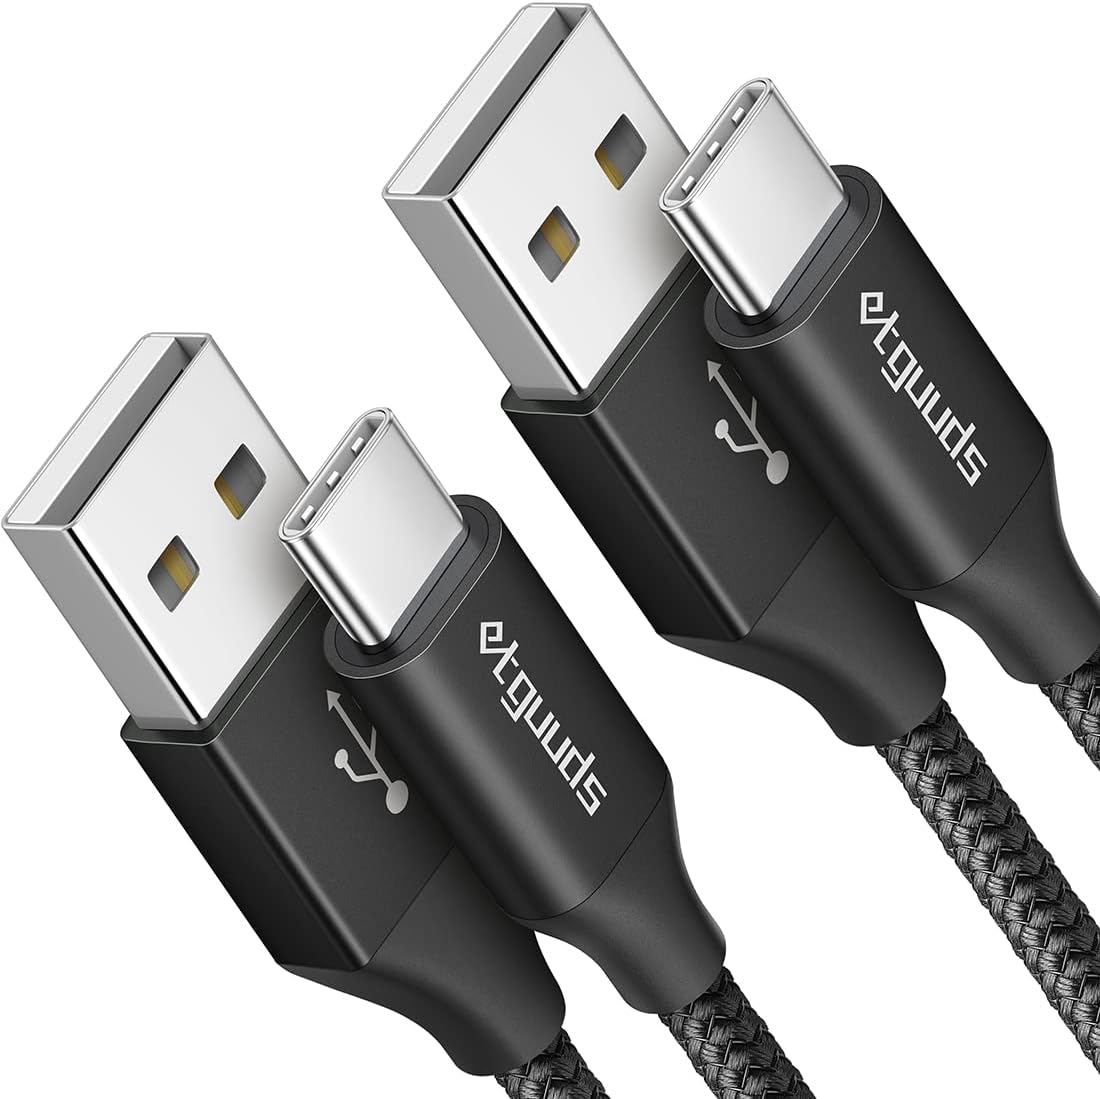 etguuds 2-Pack, 3ft USB C Cable 3A Fast Charging, USB [...]